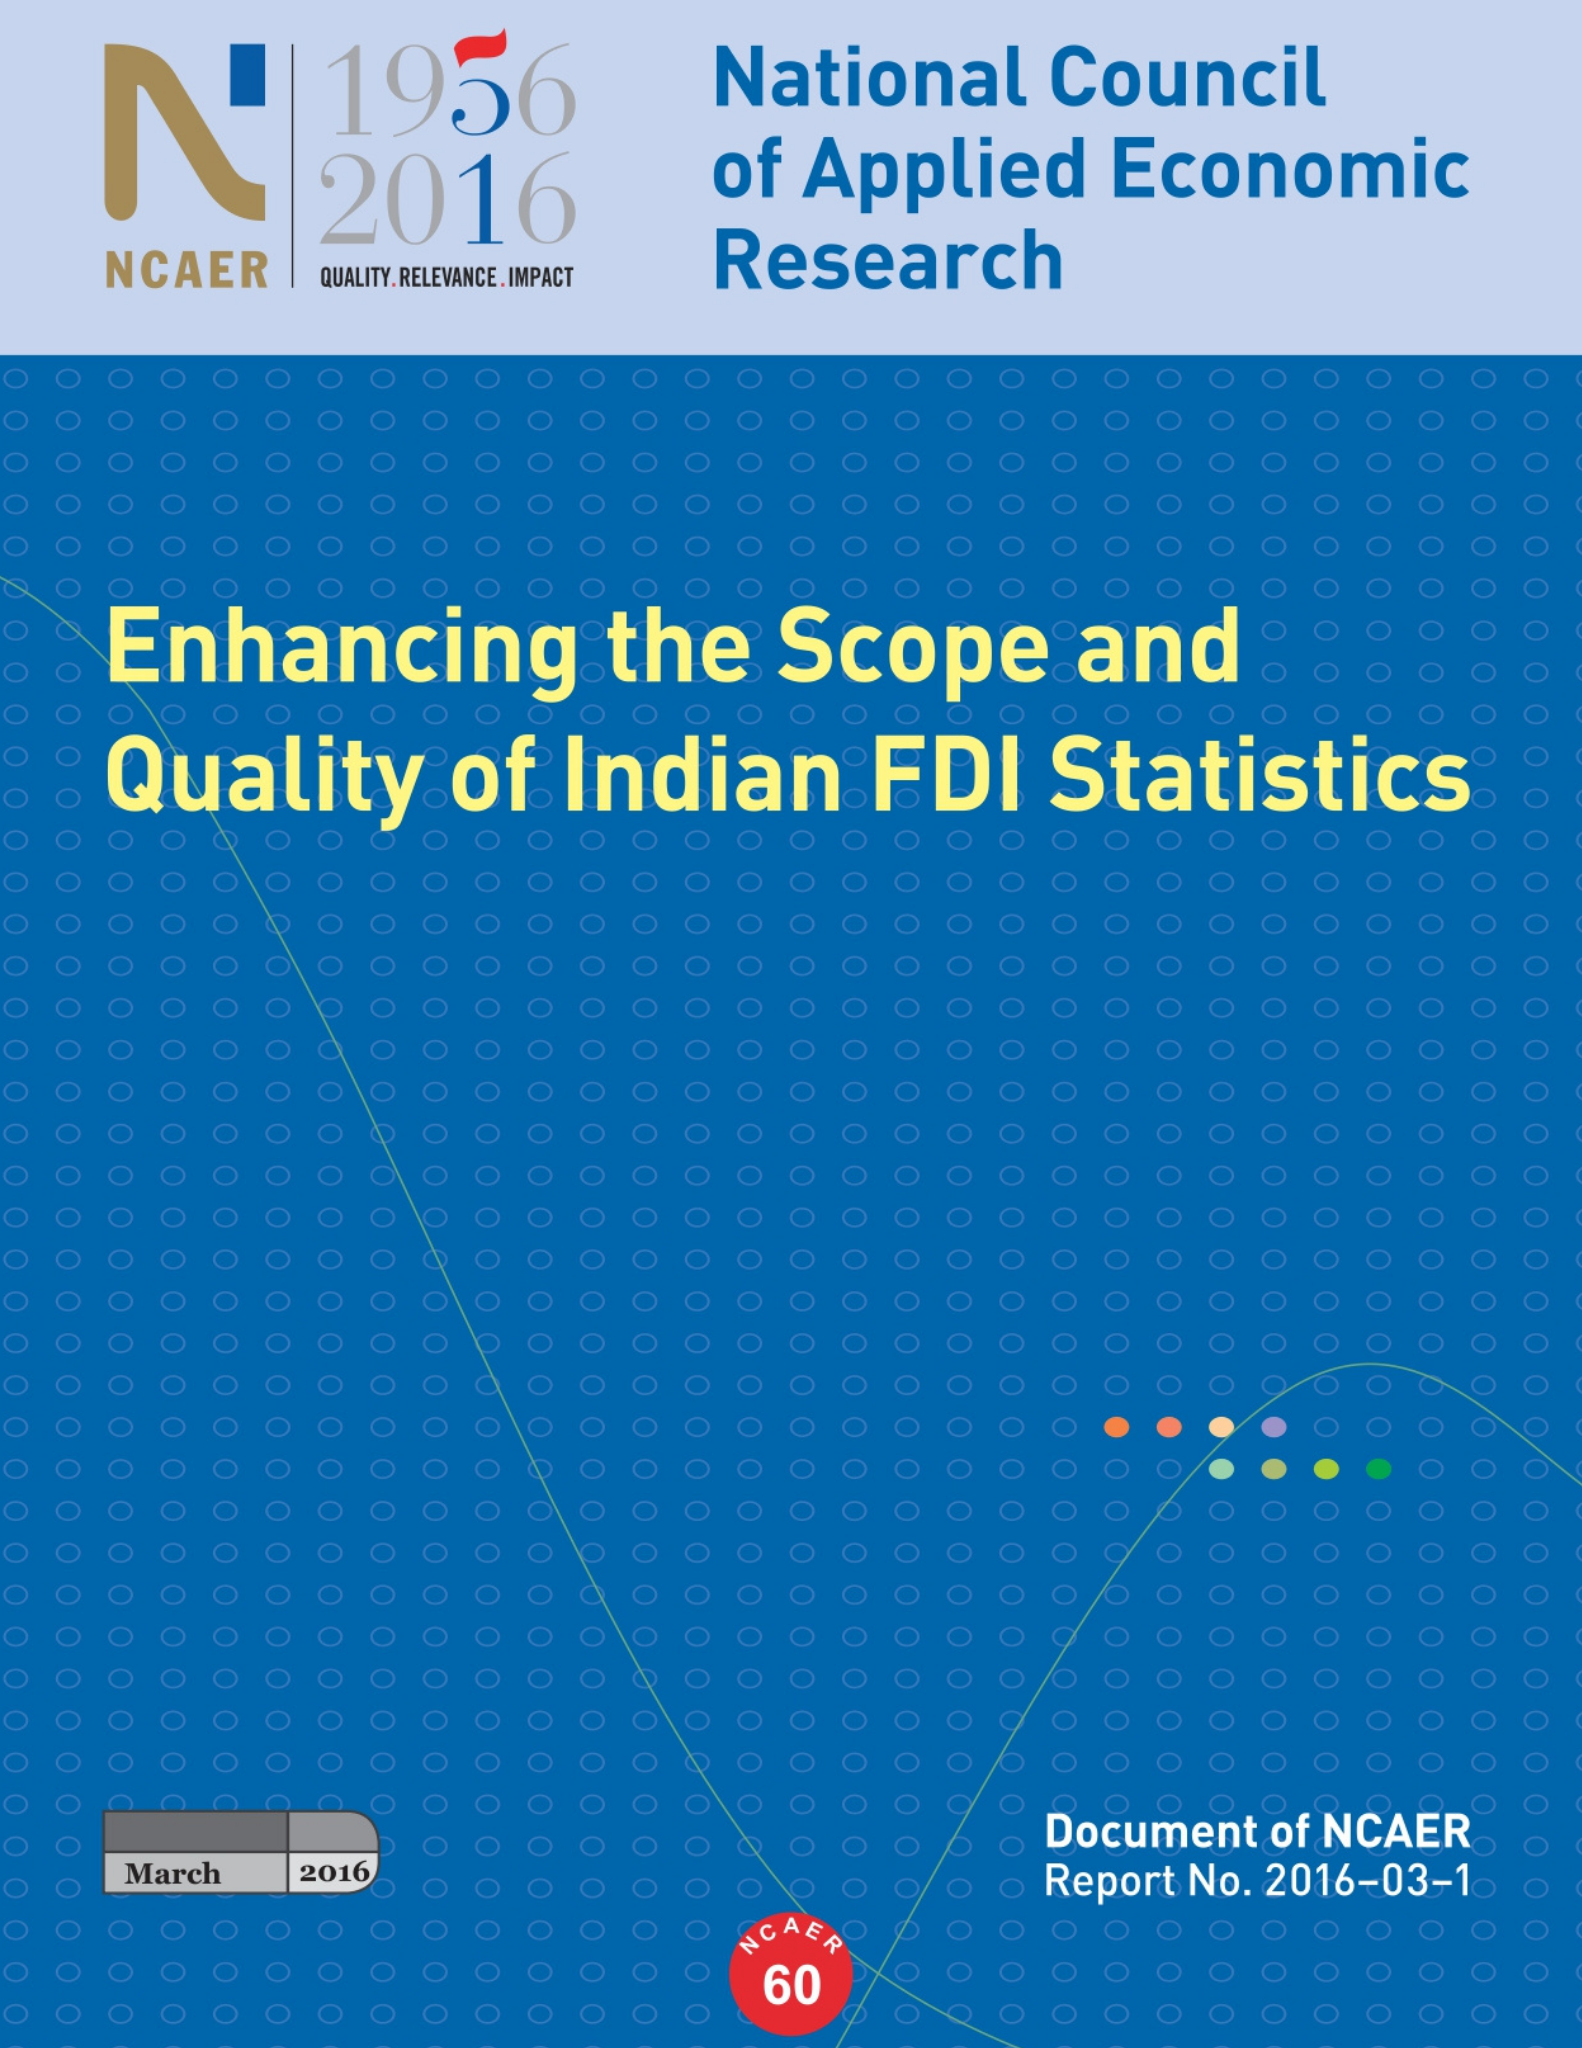 Enhancing the Scope and Quality of Indian FDI Statistics